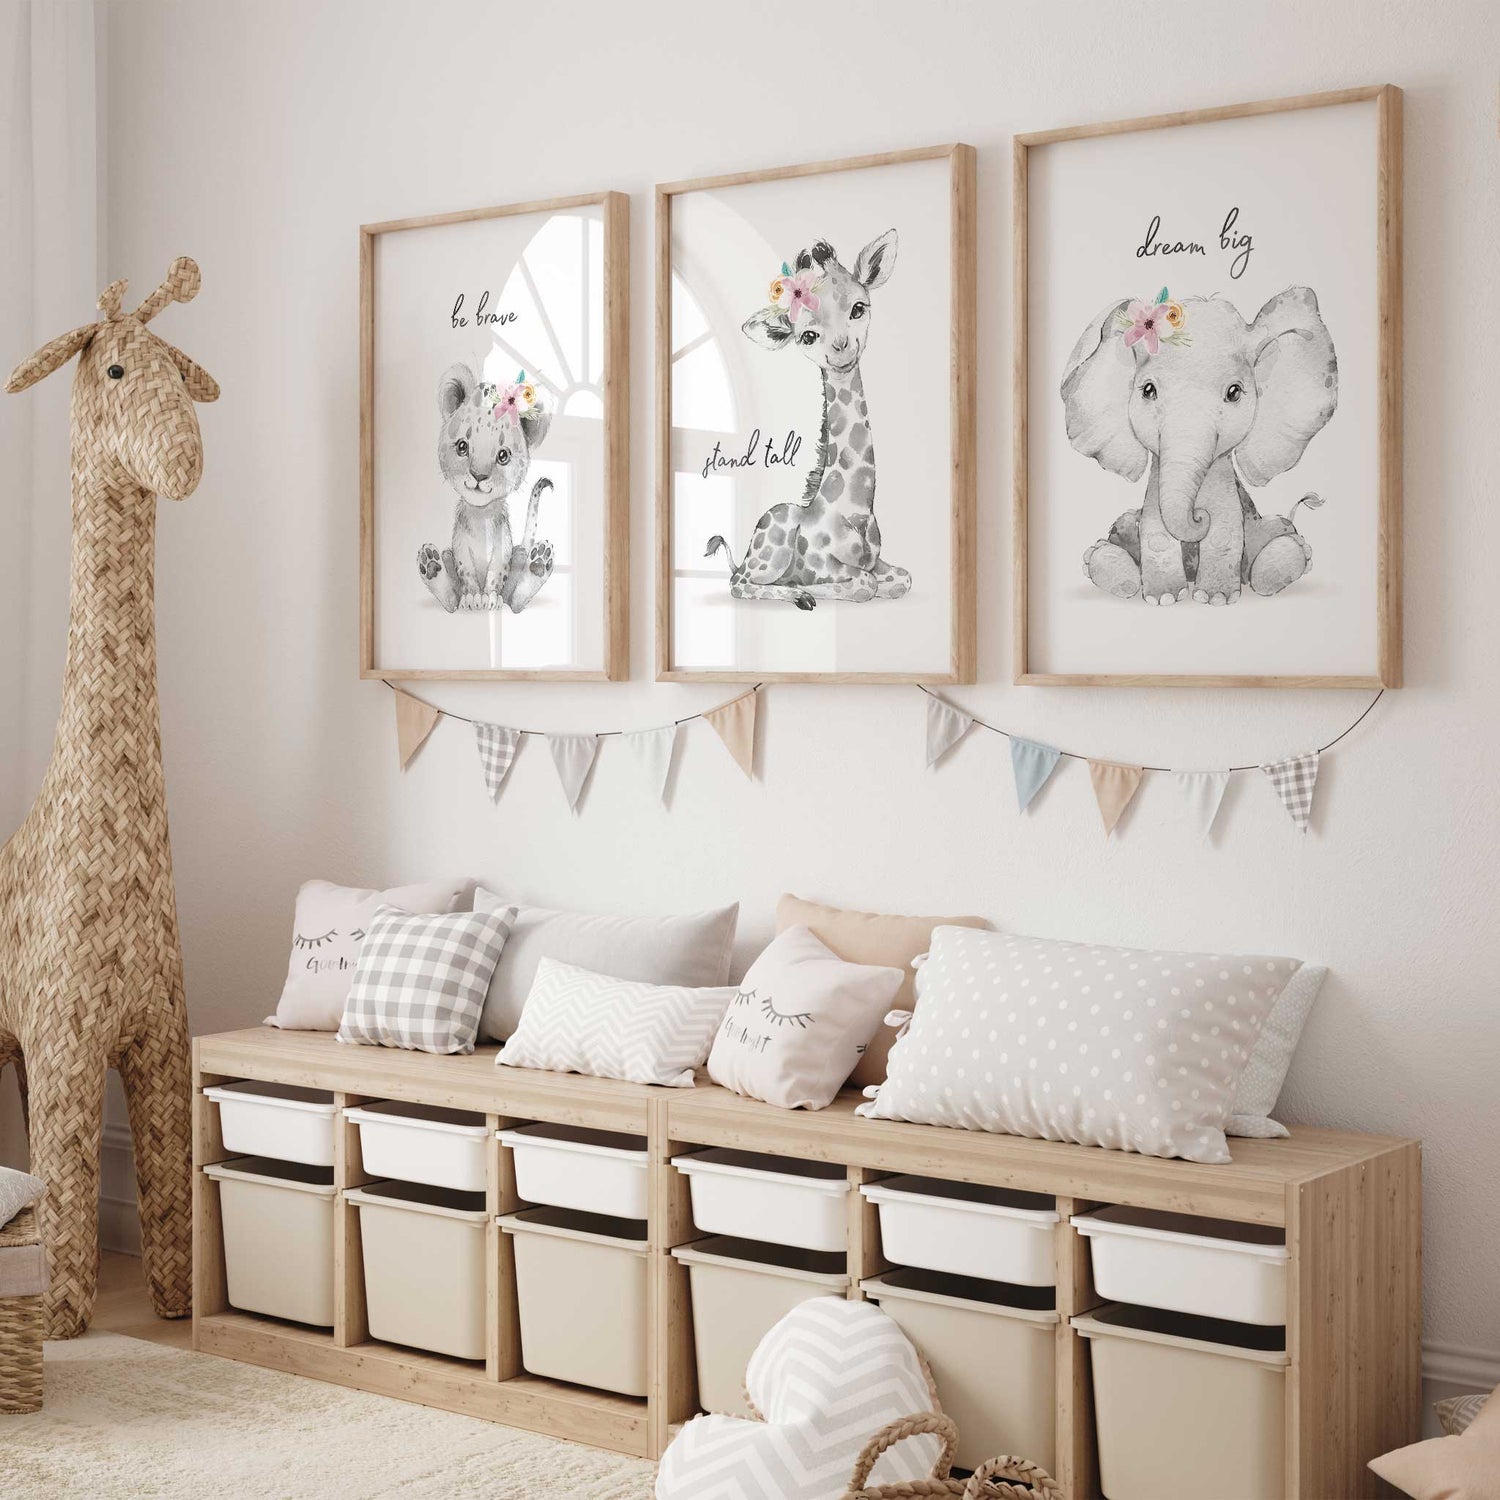 11x14 Canvas Print with Woodland Animals for Your Nursery or Kids Room -  Schafer Art Studio